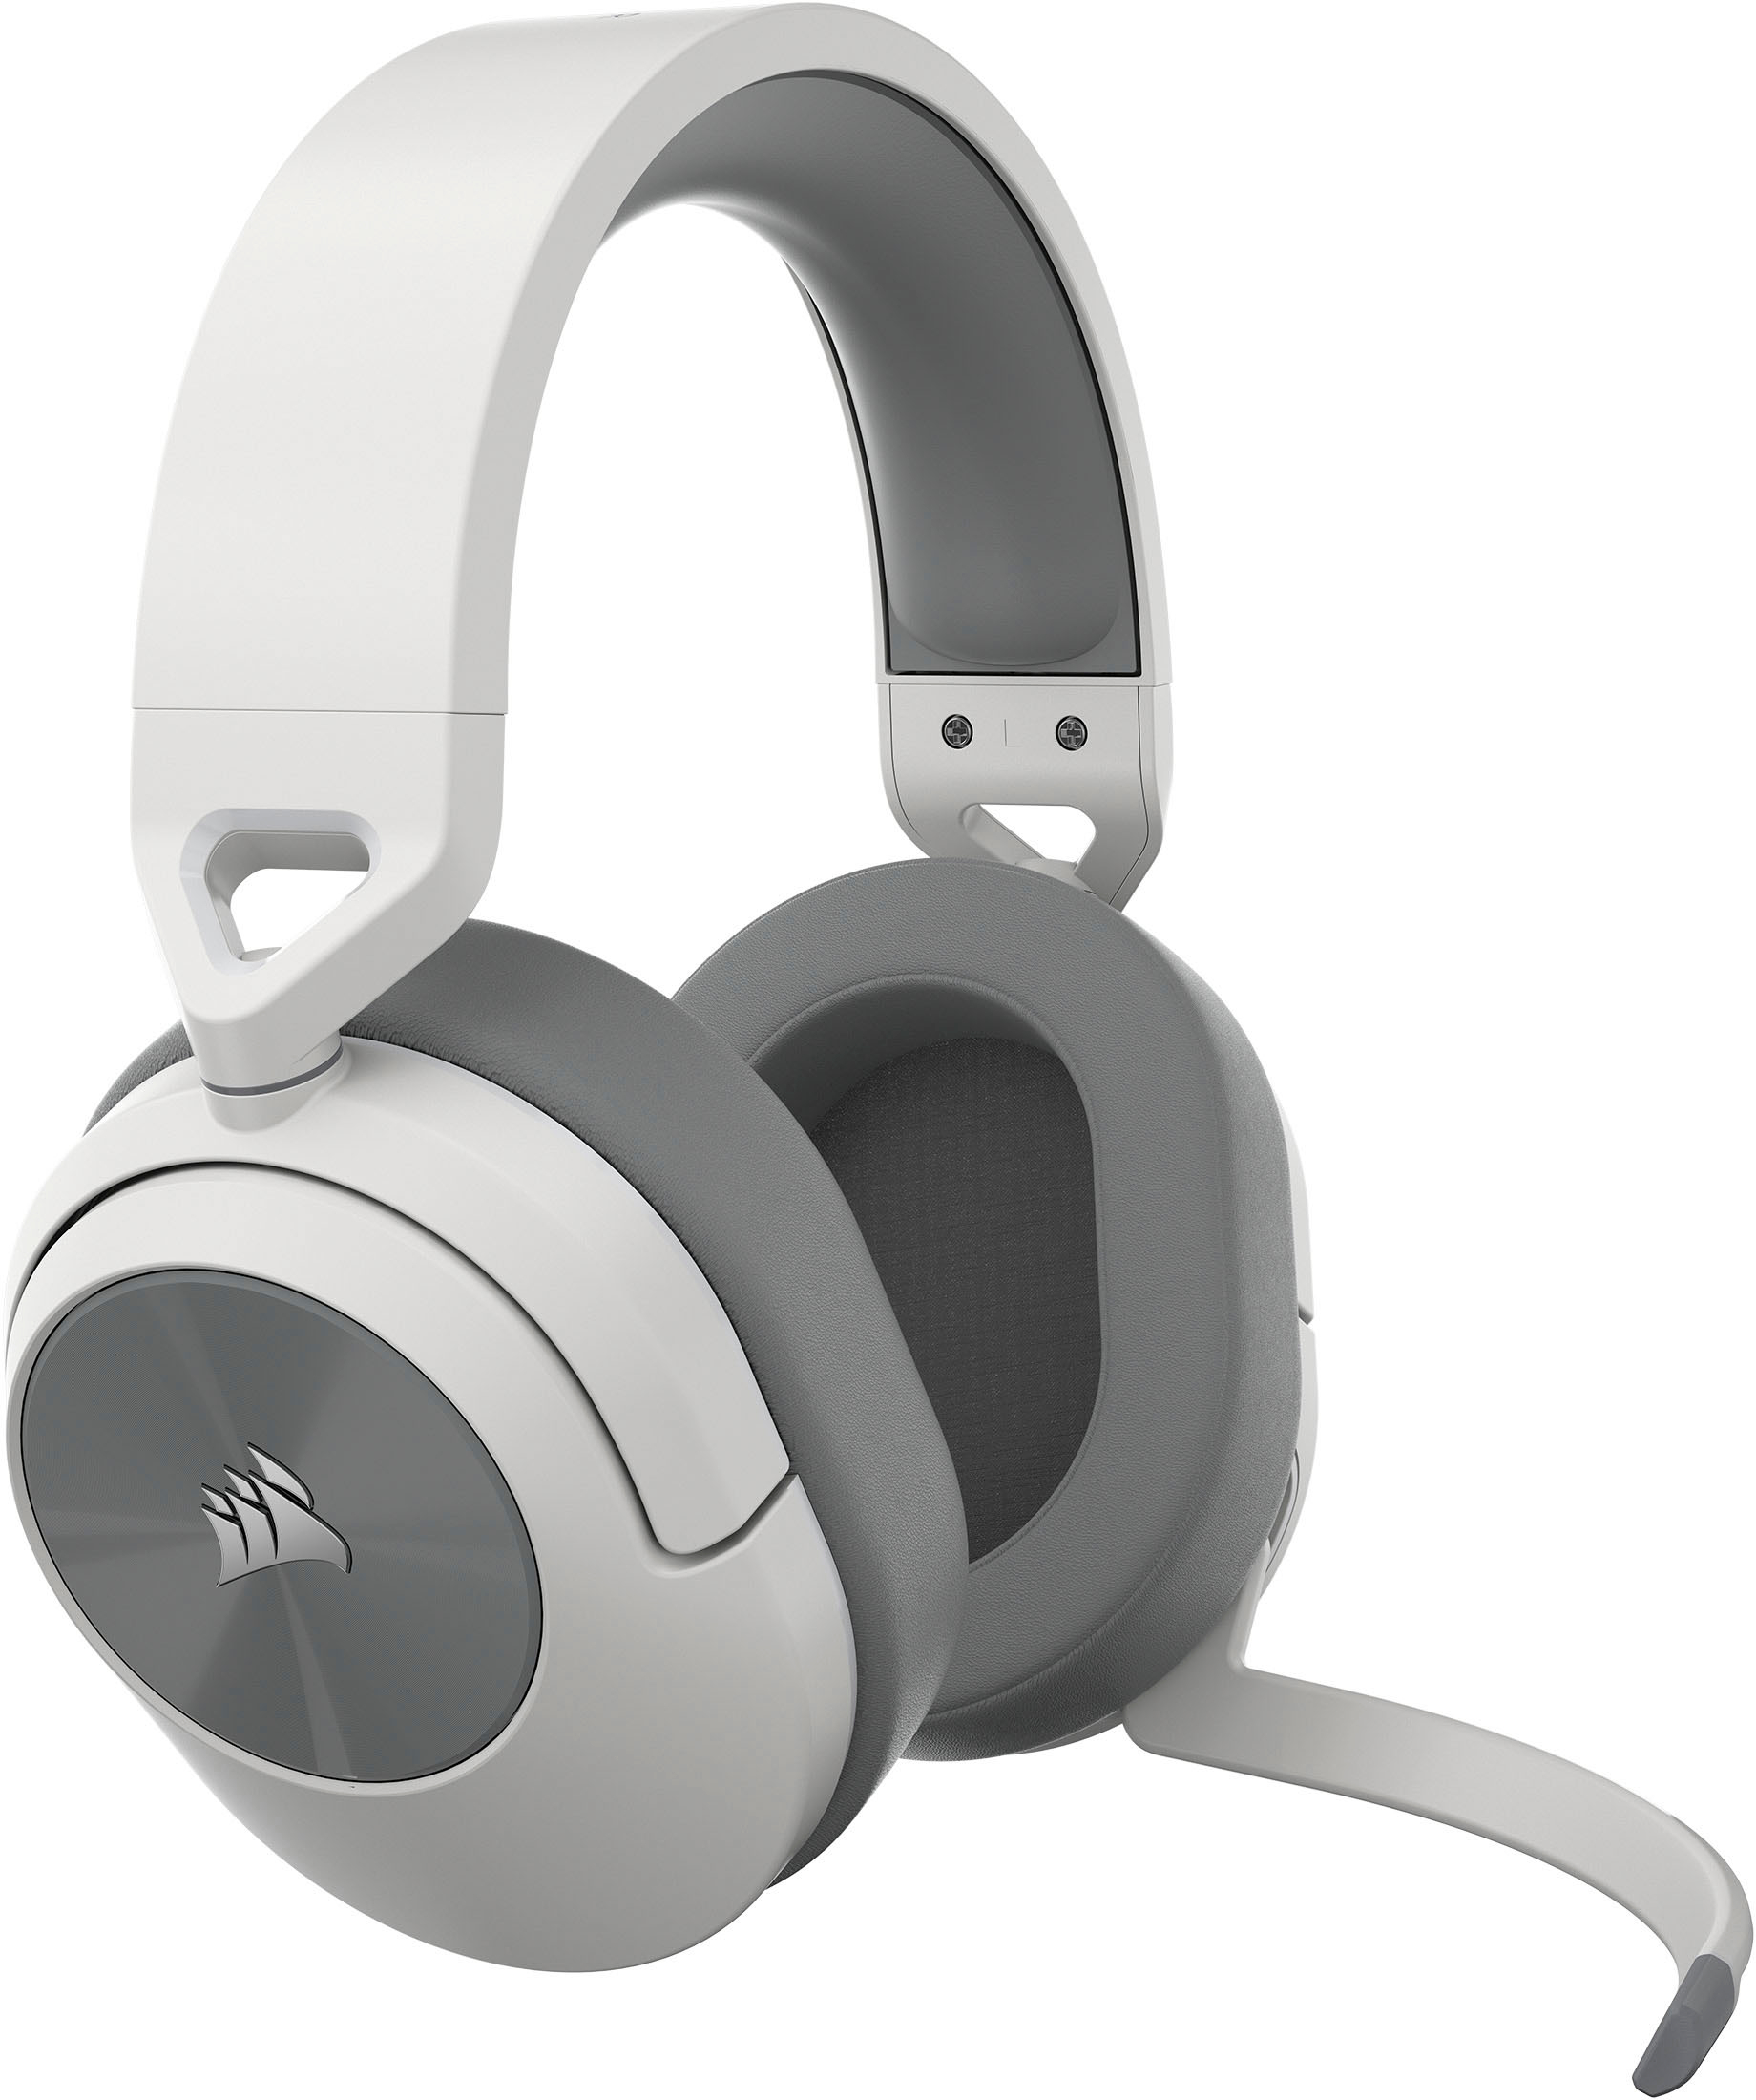 HS55 Best Series Mobile CA-9011281-NA - Buy PS5, for Wireless White Headset HS Gaming and PC, CORSAIR